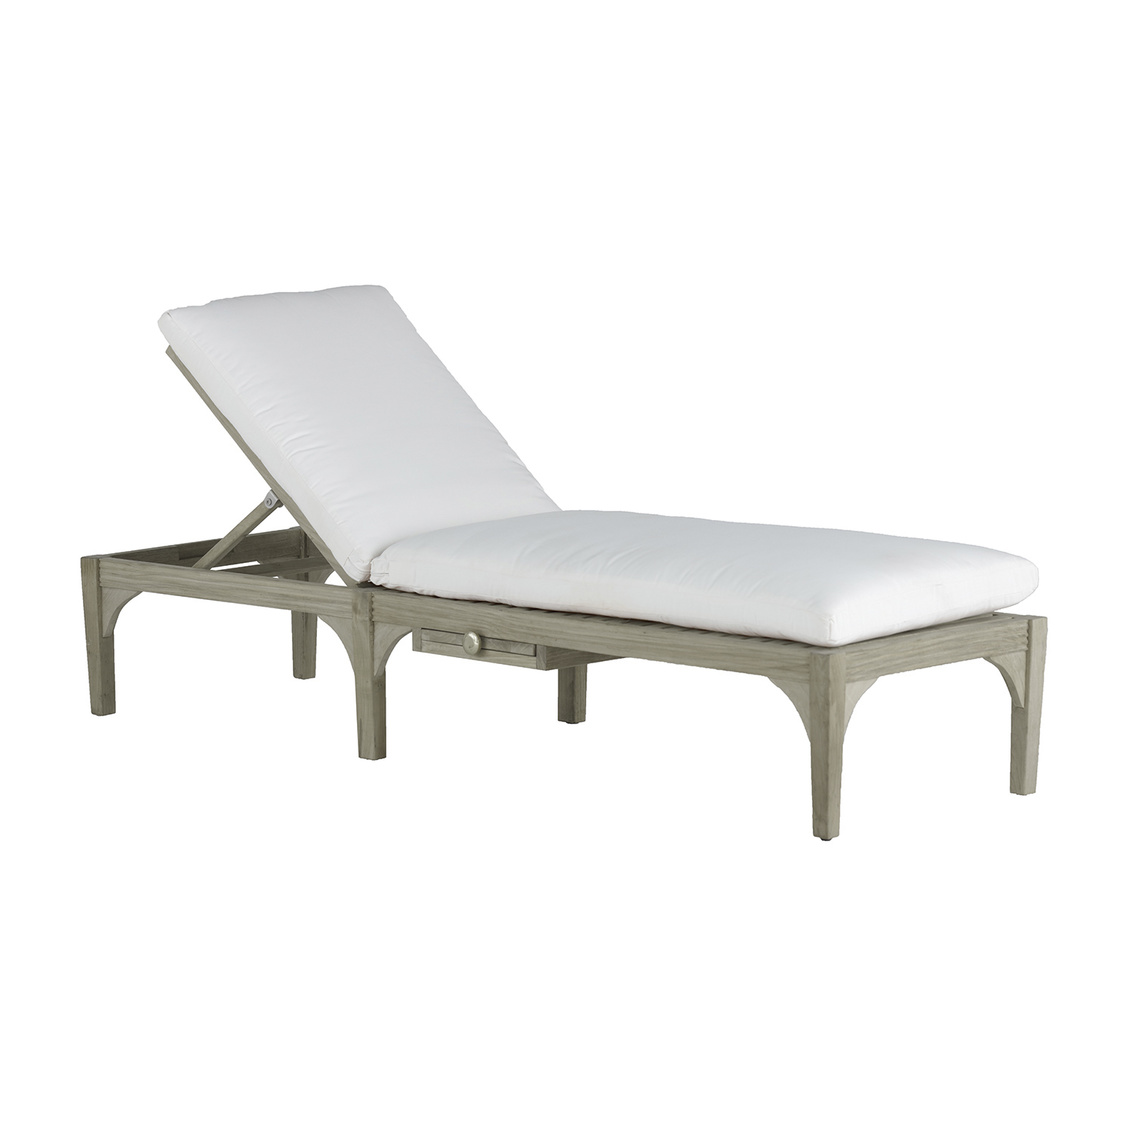 club teak chaise in oyster teak – w/ wheel – frame only product image